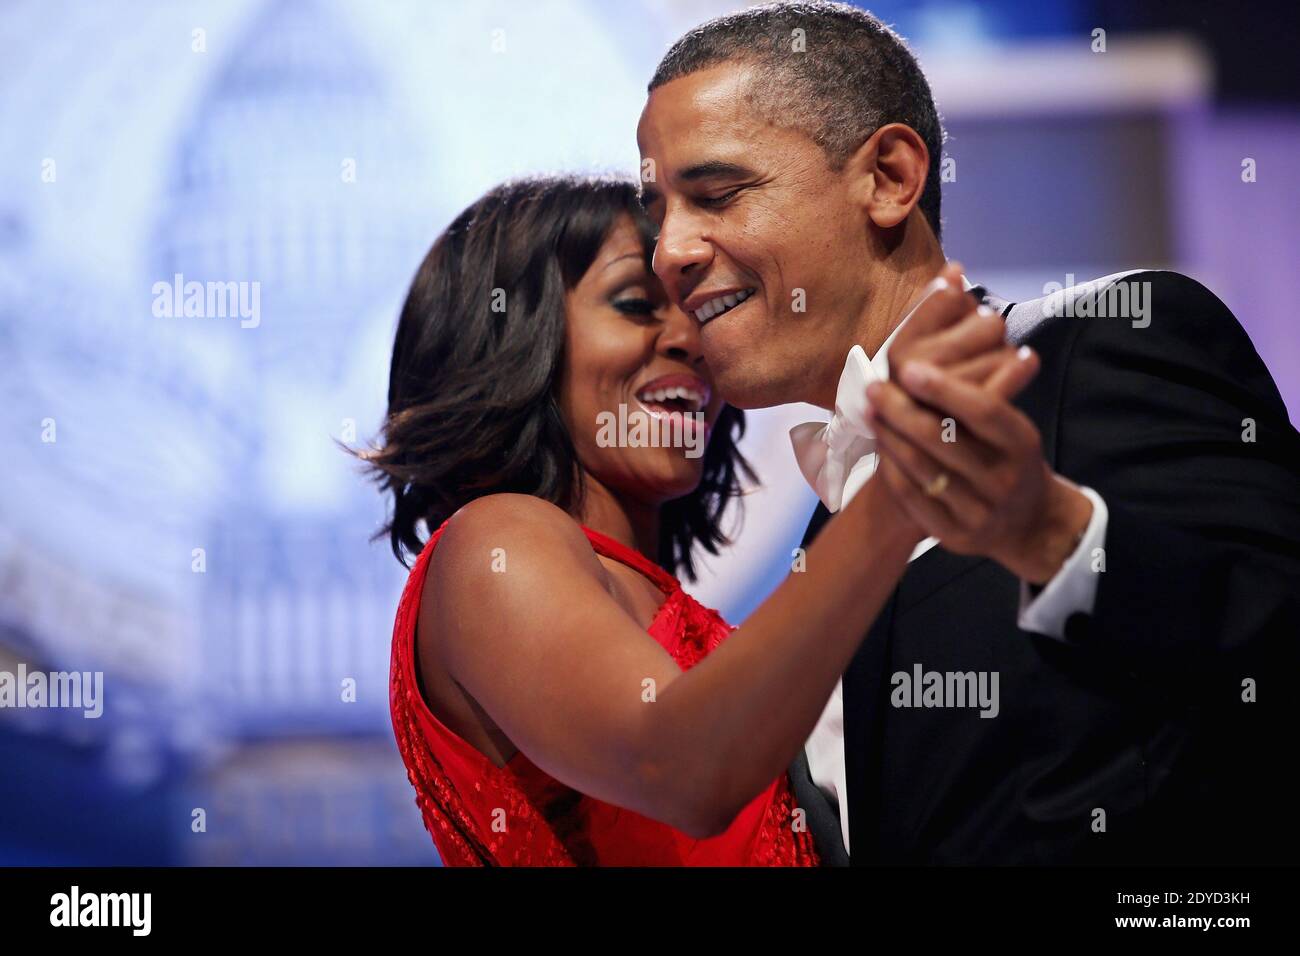 President Barack Obama and First Lady Michelle Obama dance at the Commander-In-Chief Ball at the Walter Washington Convention Center in Washington, D.C. on January 21, 2013. President Obama was sworn-in for a second term as the 44th President of the United States. Photo by Chip Somodevilla/Pool/ABACAPRESS.COM Stock Photo